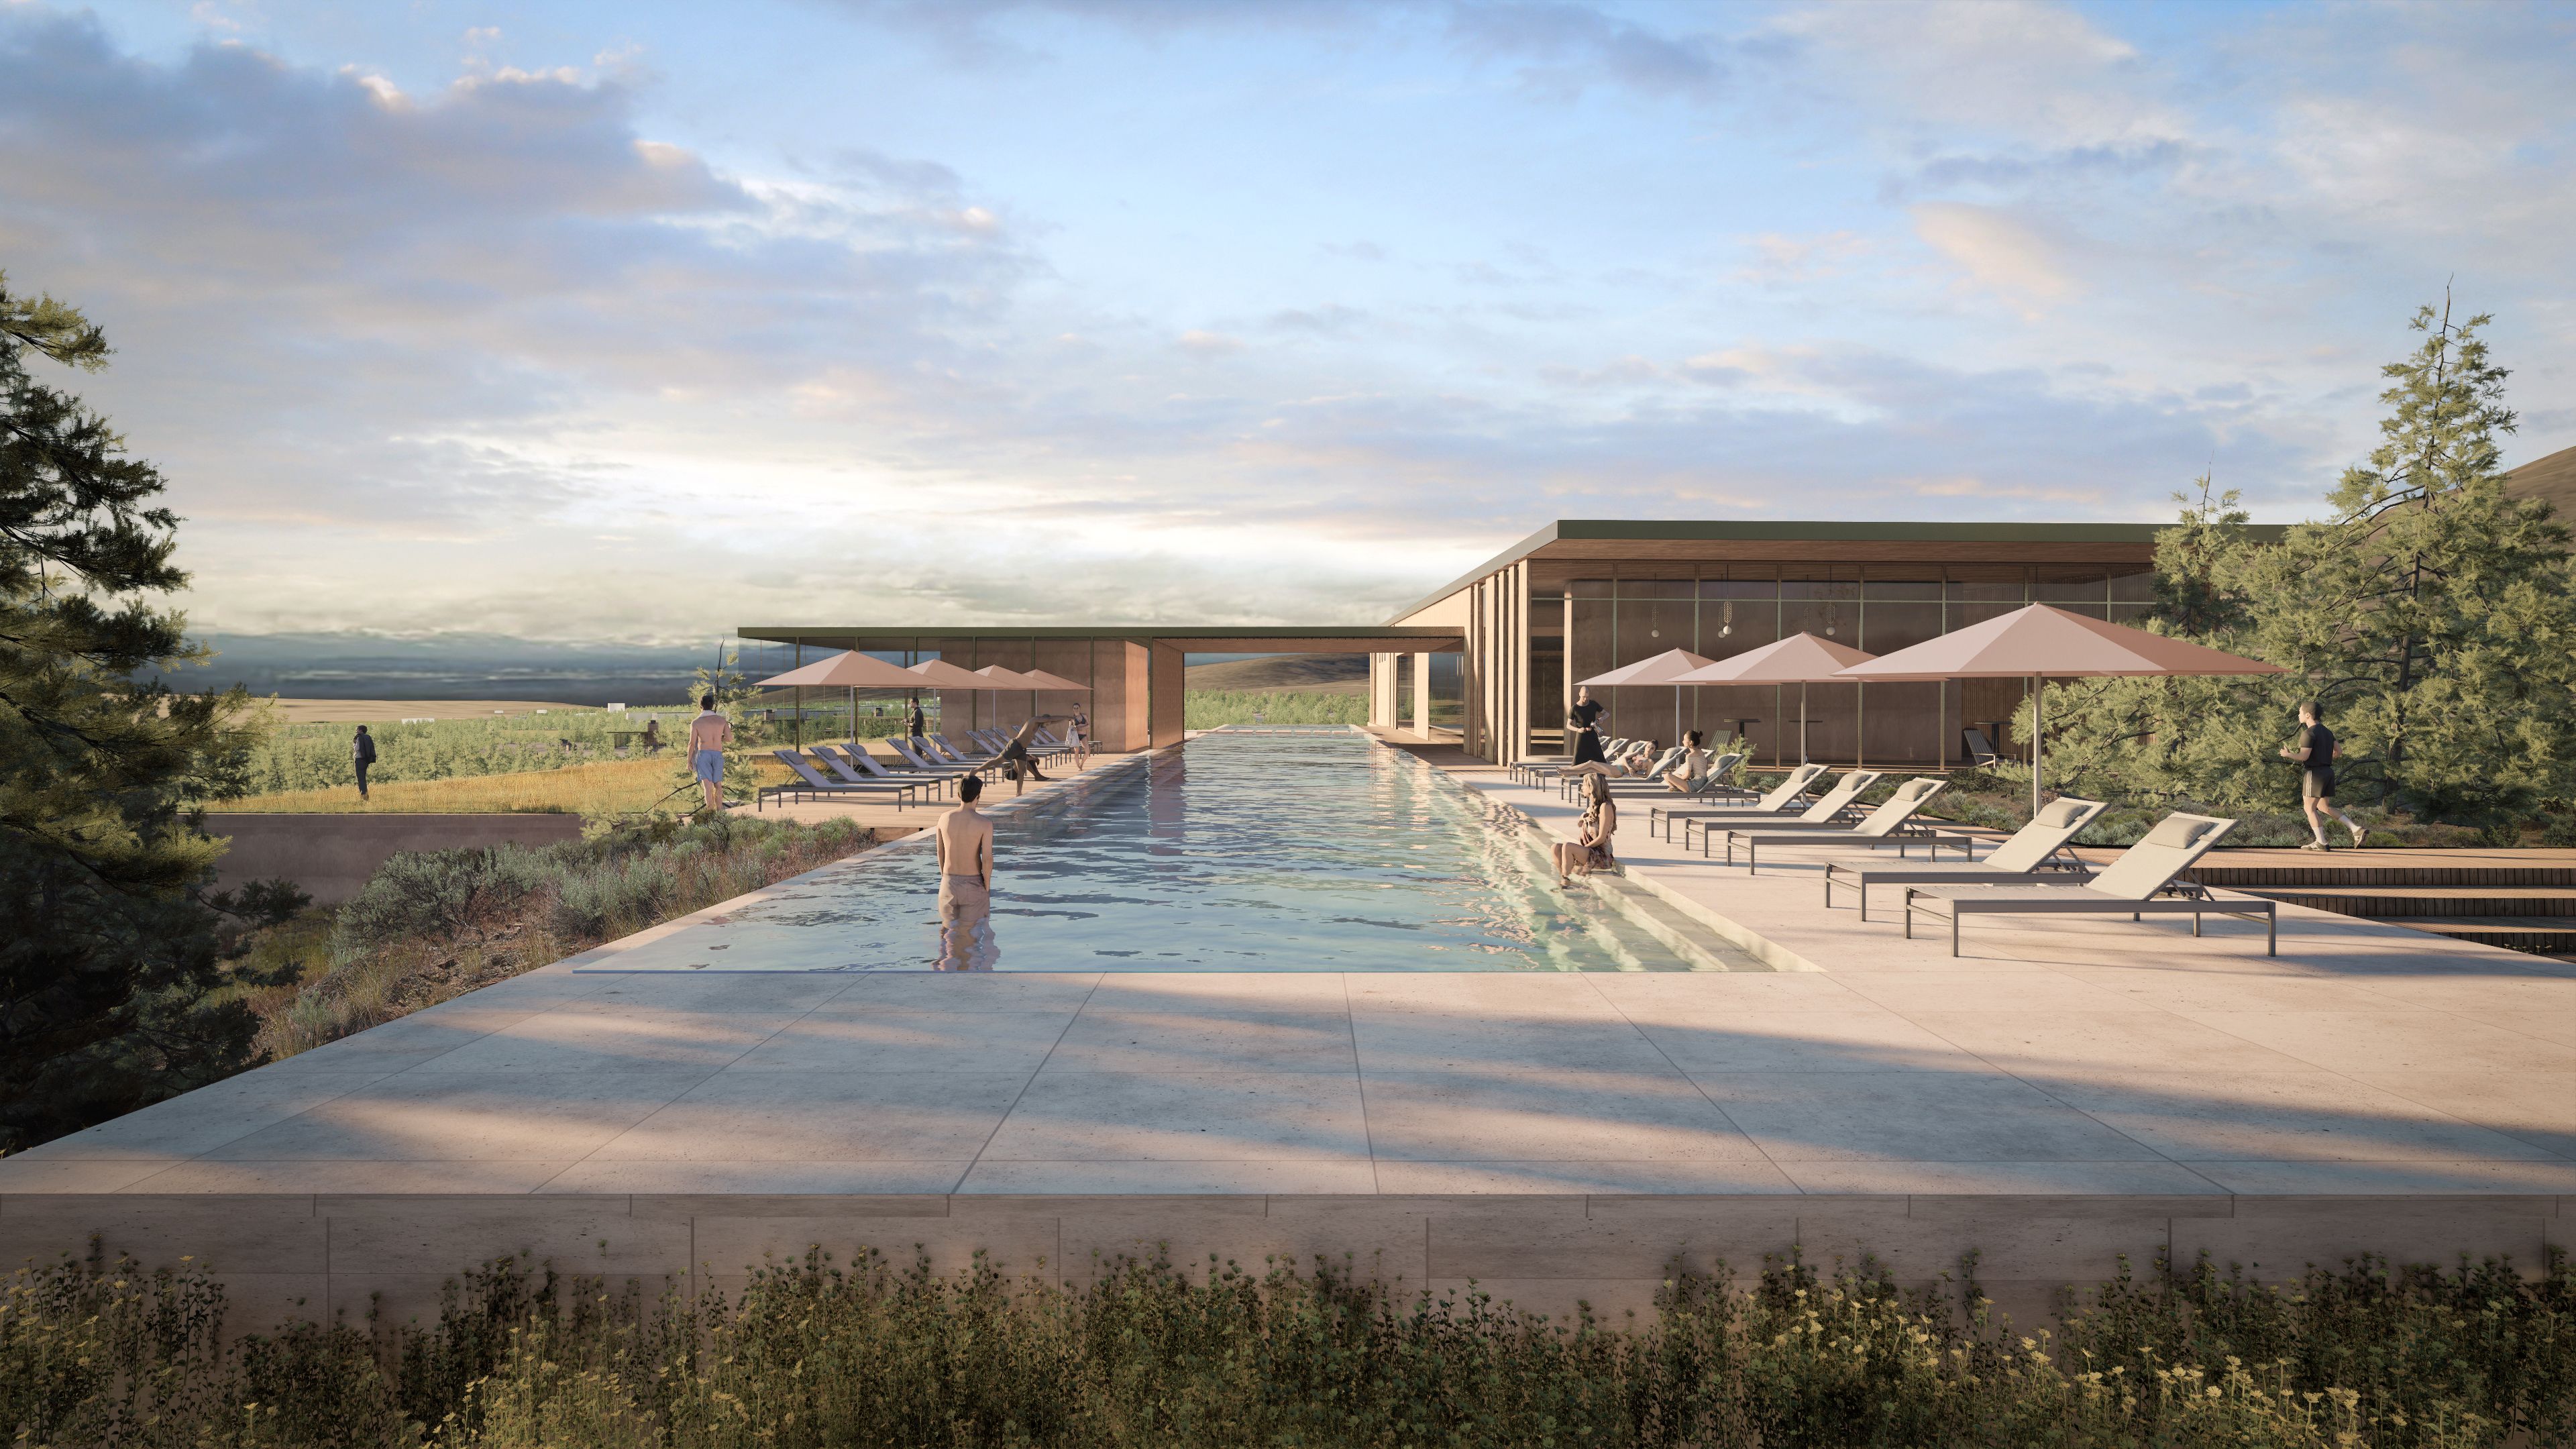 An artistic rendering of the outdoor space and pool at the in-development Thornburgh Ranch.